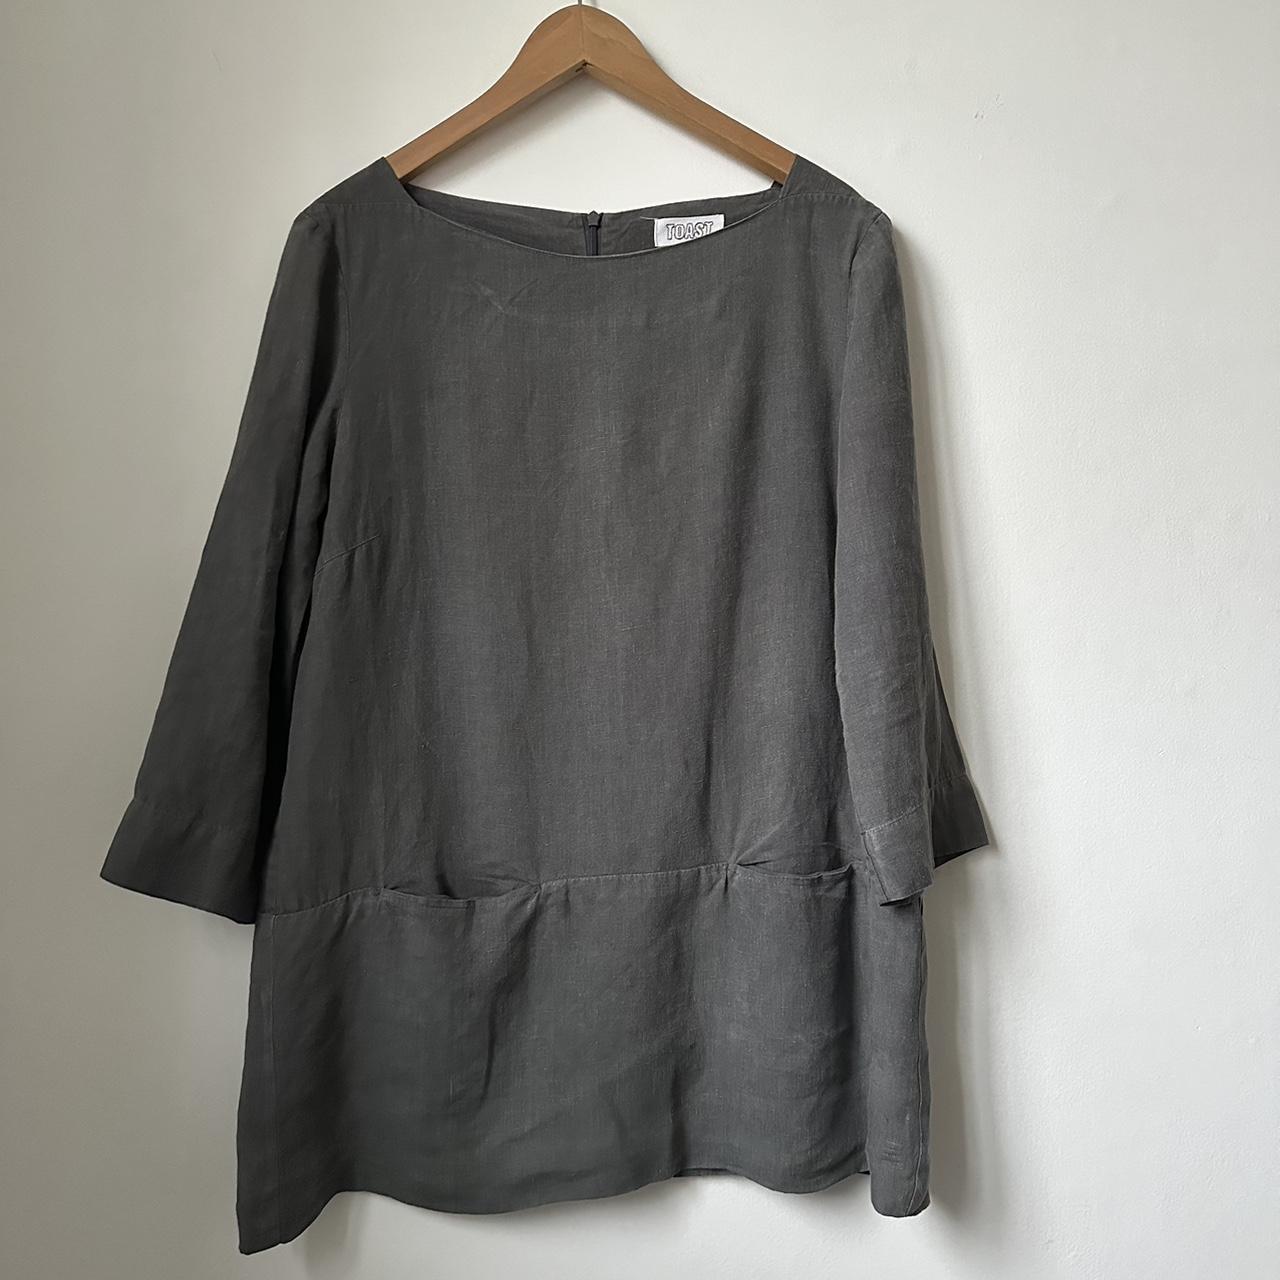 Toast grey linen tunic top. Size 12. Worn but in... - Depop